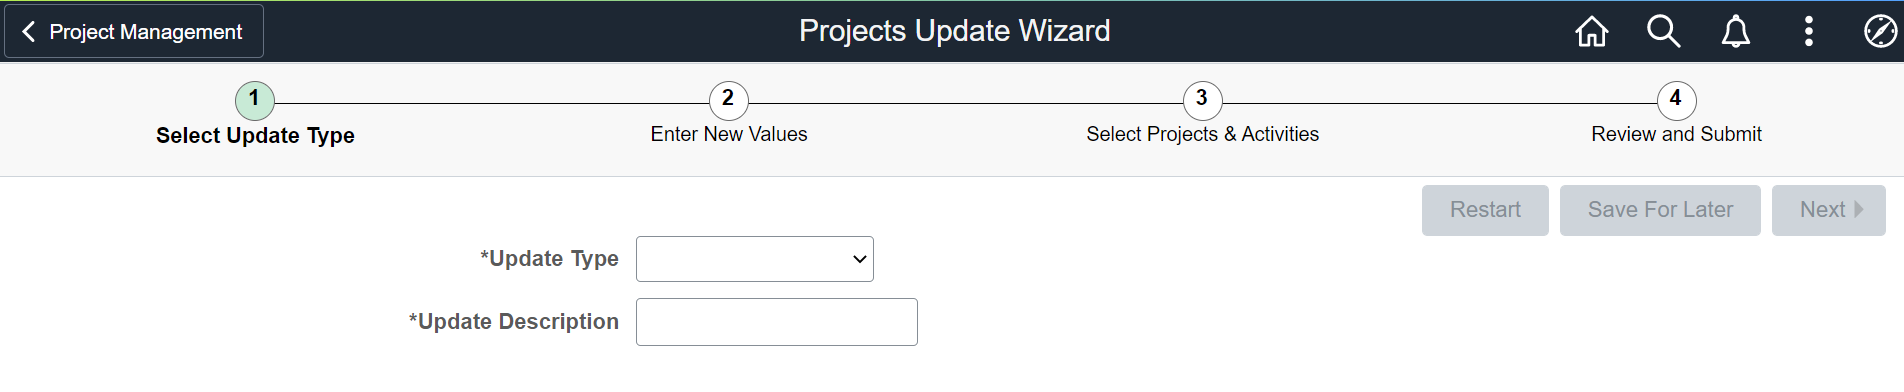 Projects Update Wizard